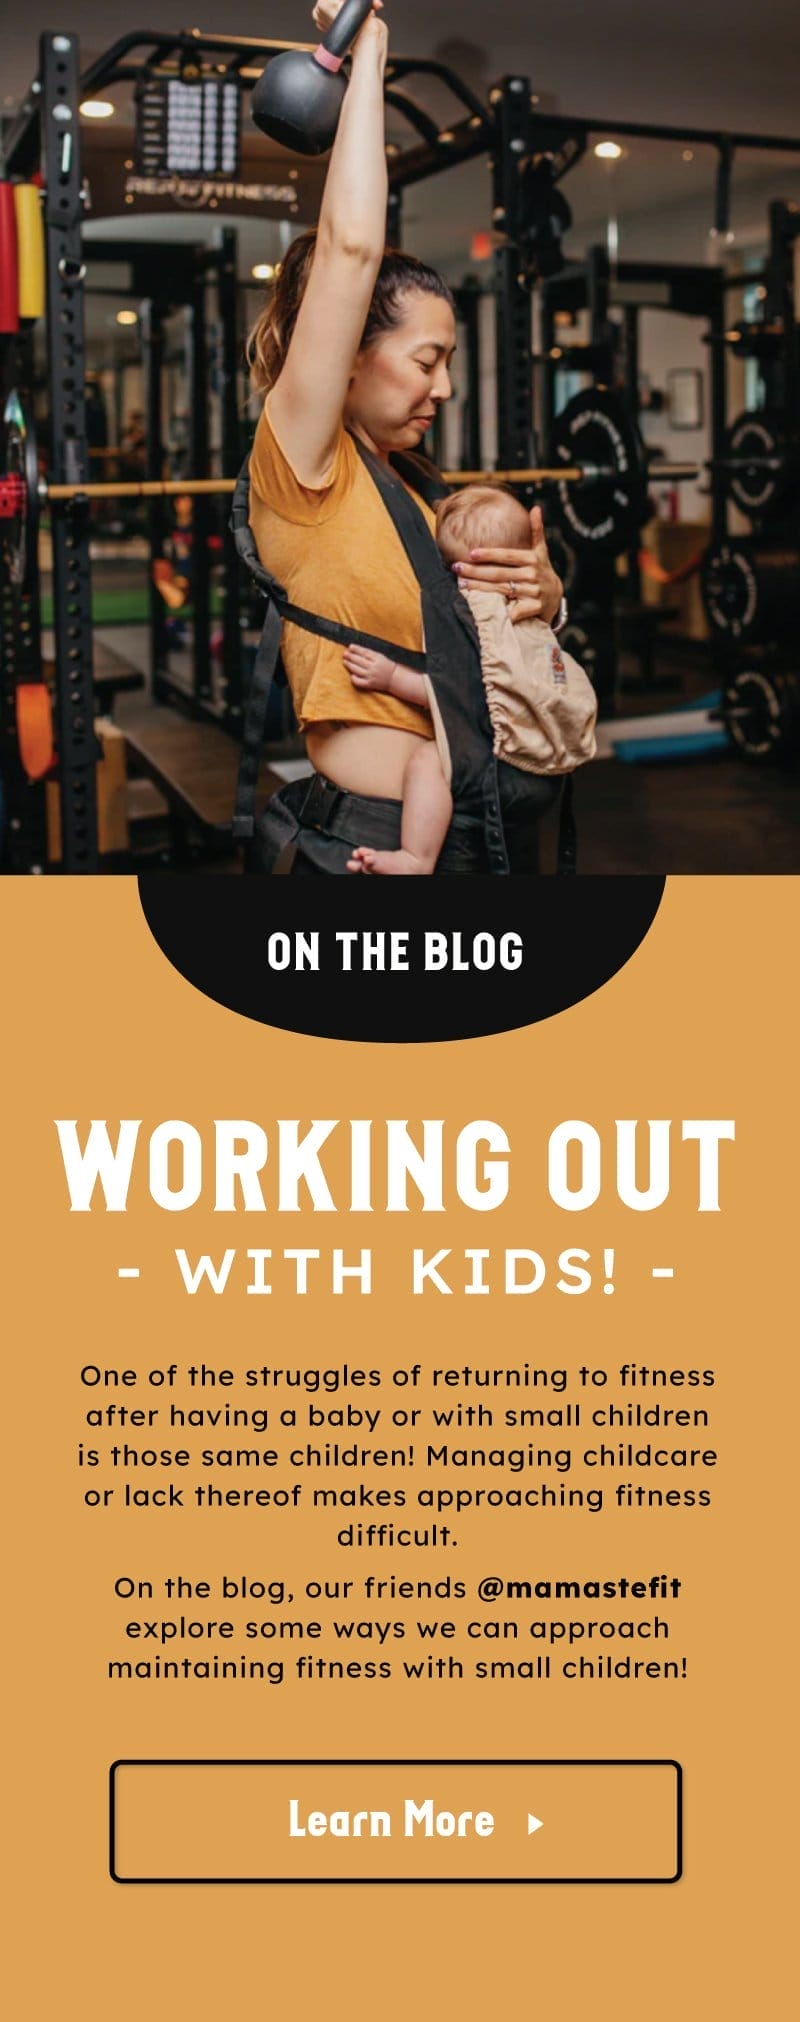 tap now to learn about how to train with kids